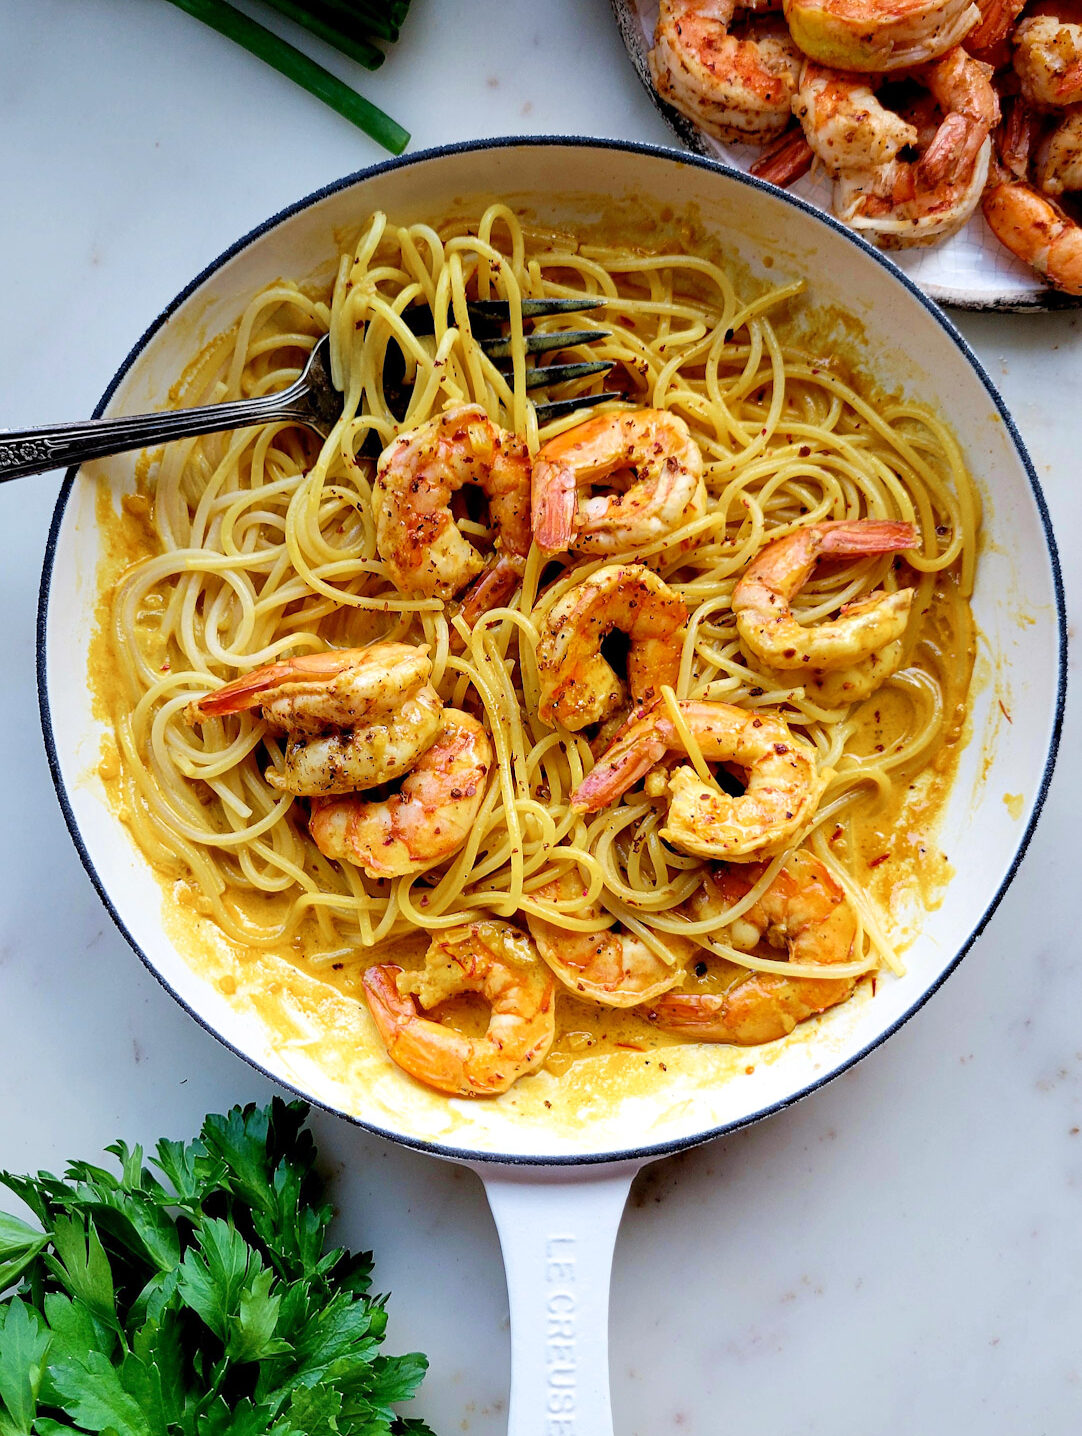 A skillet filled with Harissa Shrimp Pasta with Saffron Sauce, More shrimp and parsley are to the side.